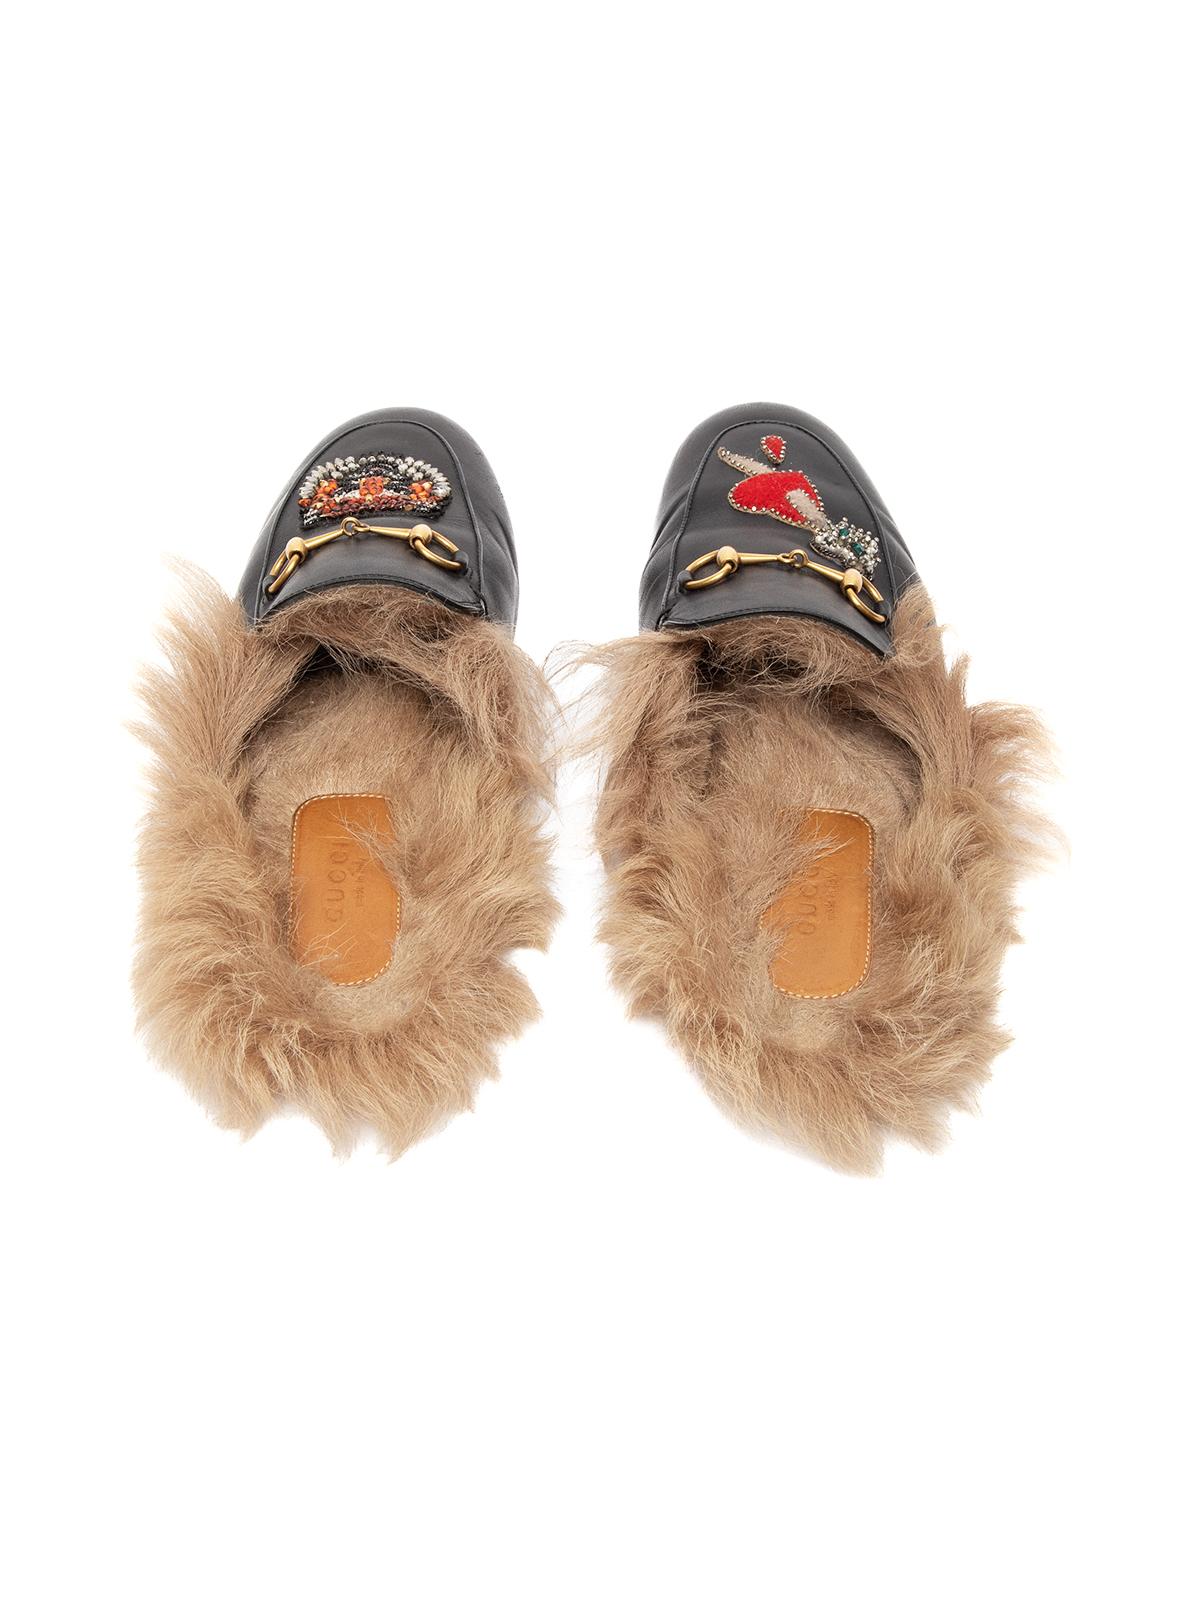 Brown Pre-Loved Gucci Women's Fur Princetown Slippers